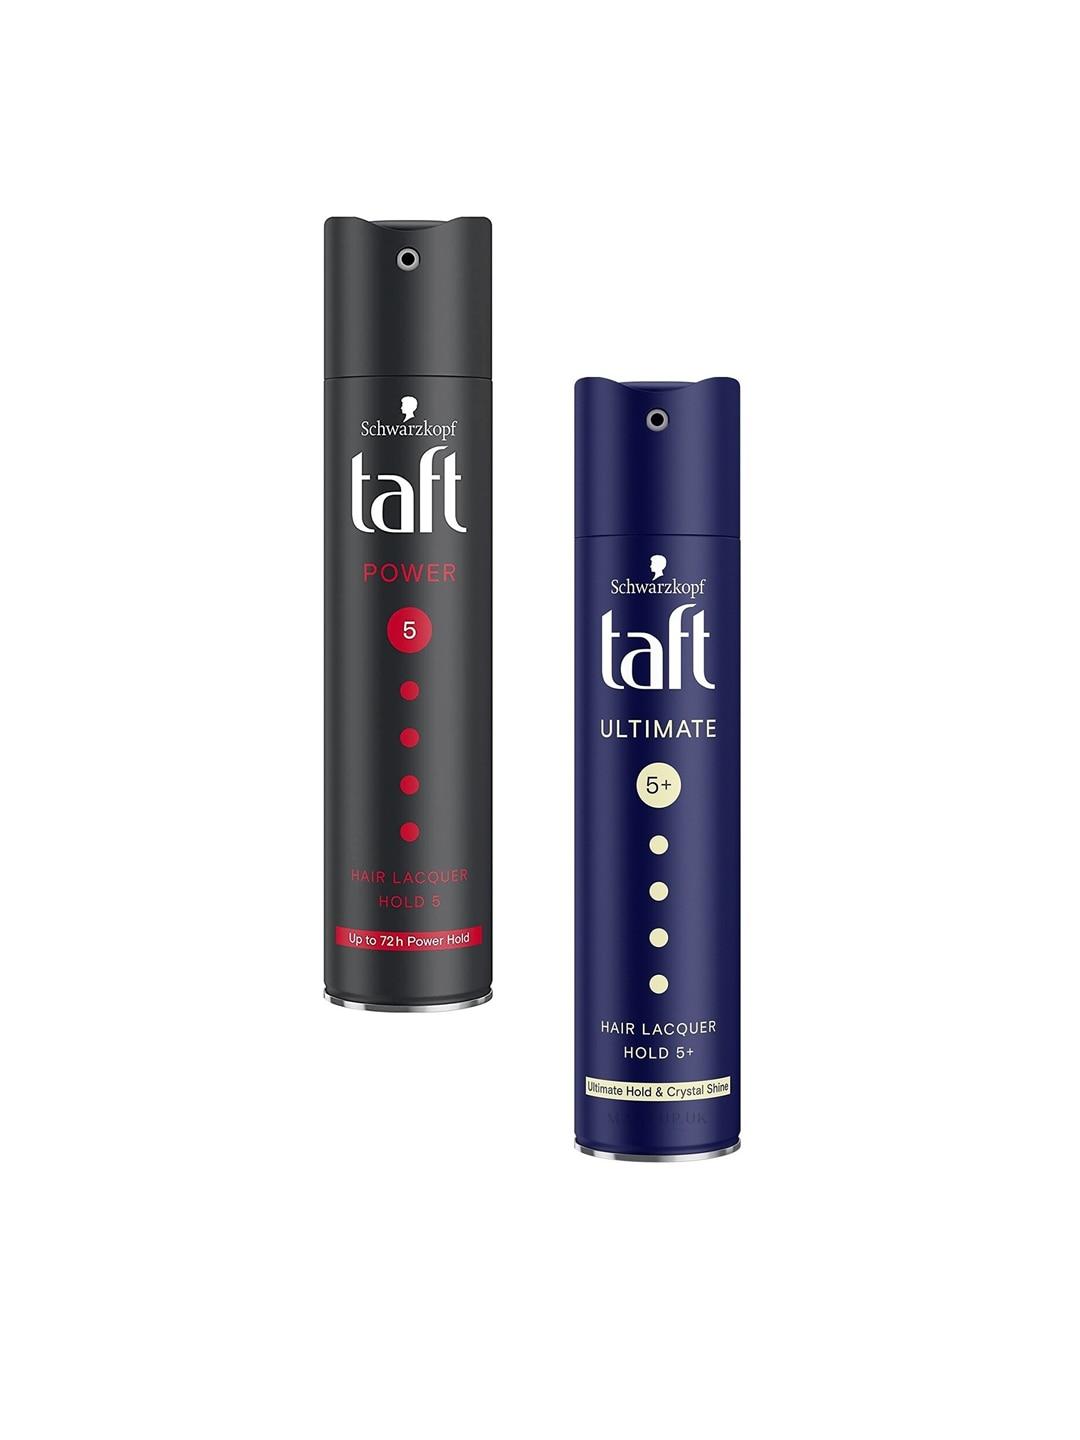 taft-set-of-power-5-&-ultimate-5+-hair-lacquer---250-ml-each